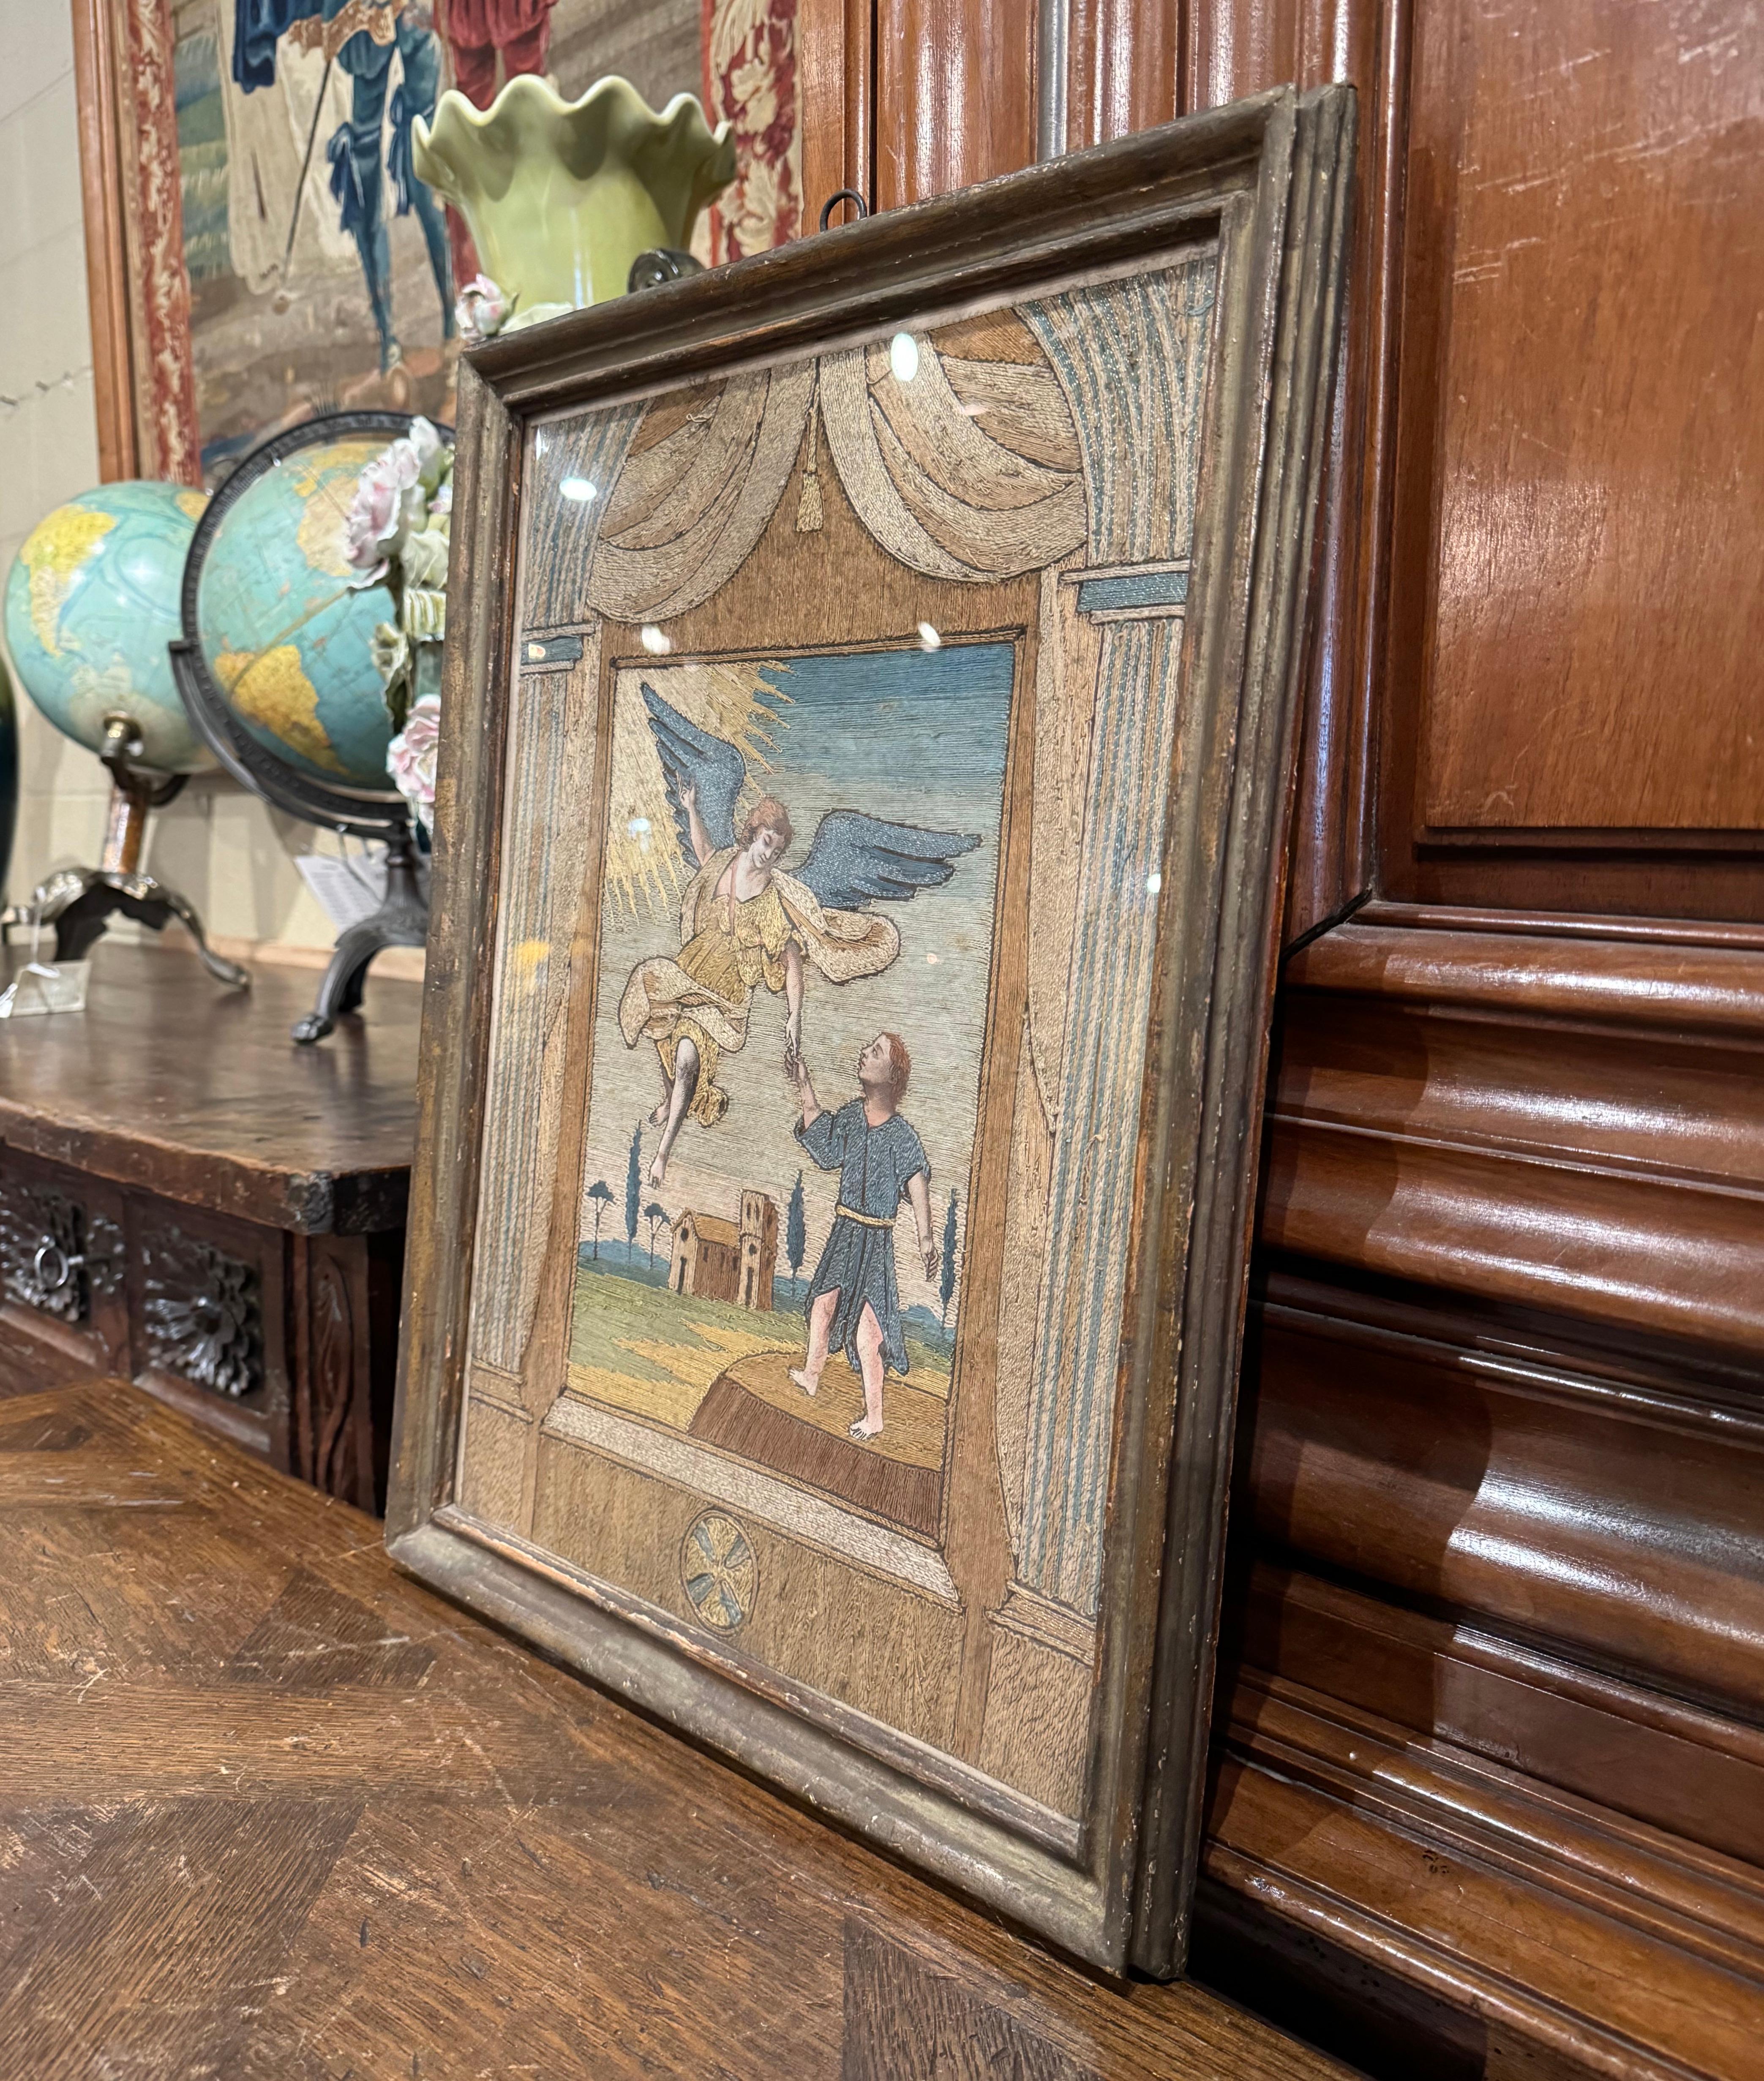 Decorate a study or hallway with this elegant and colorful wall decor. Hand crafted in Denmark circa 1937 set in a frame protected with glass, the panel depicts an angel reaching down from the heavens to guide a young man. Depicted in the background